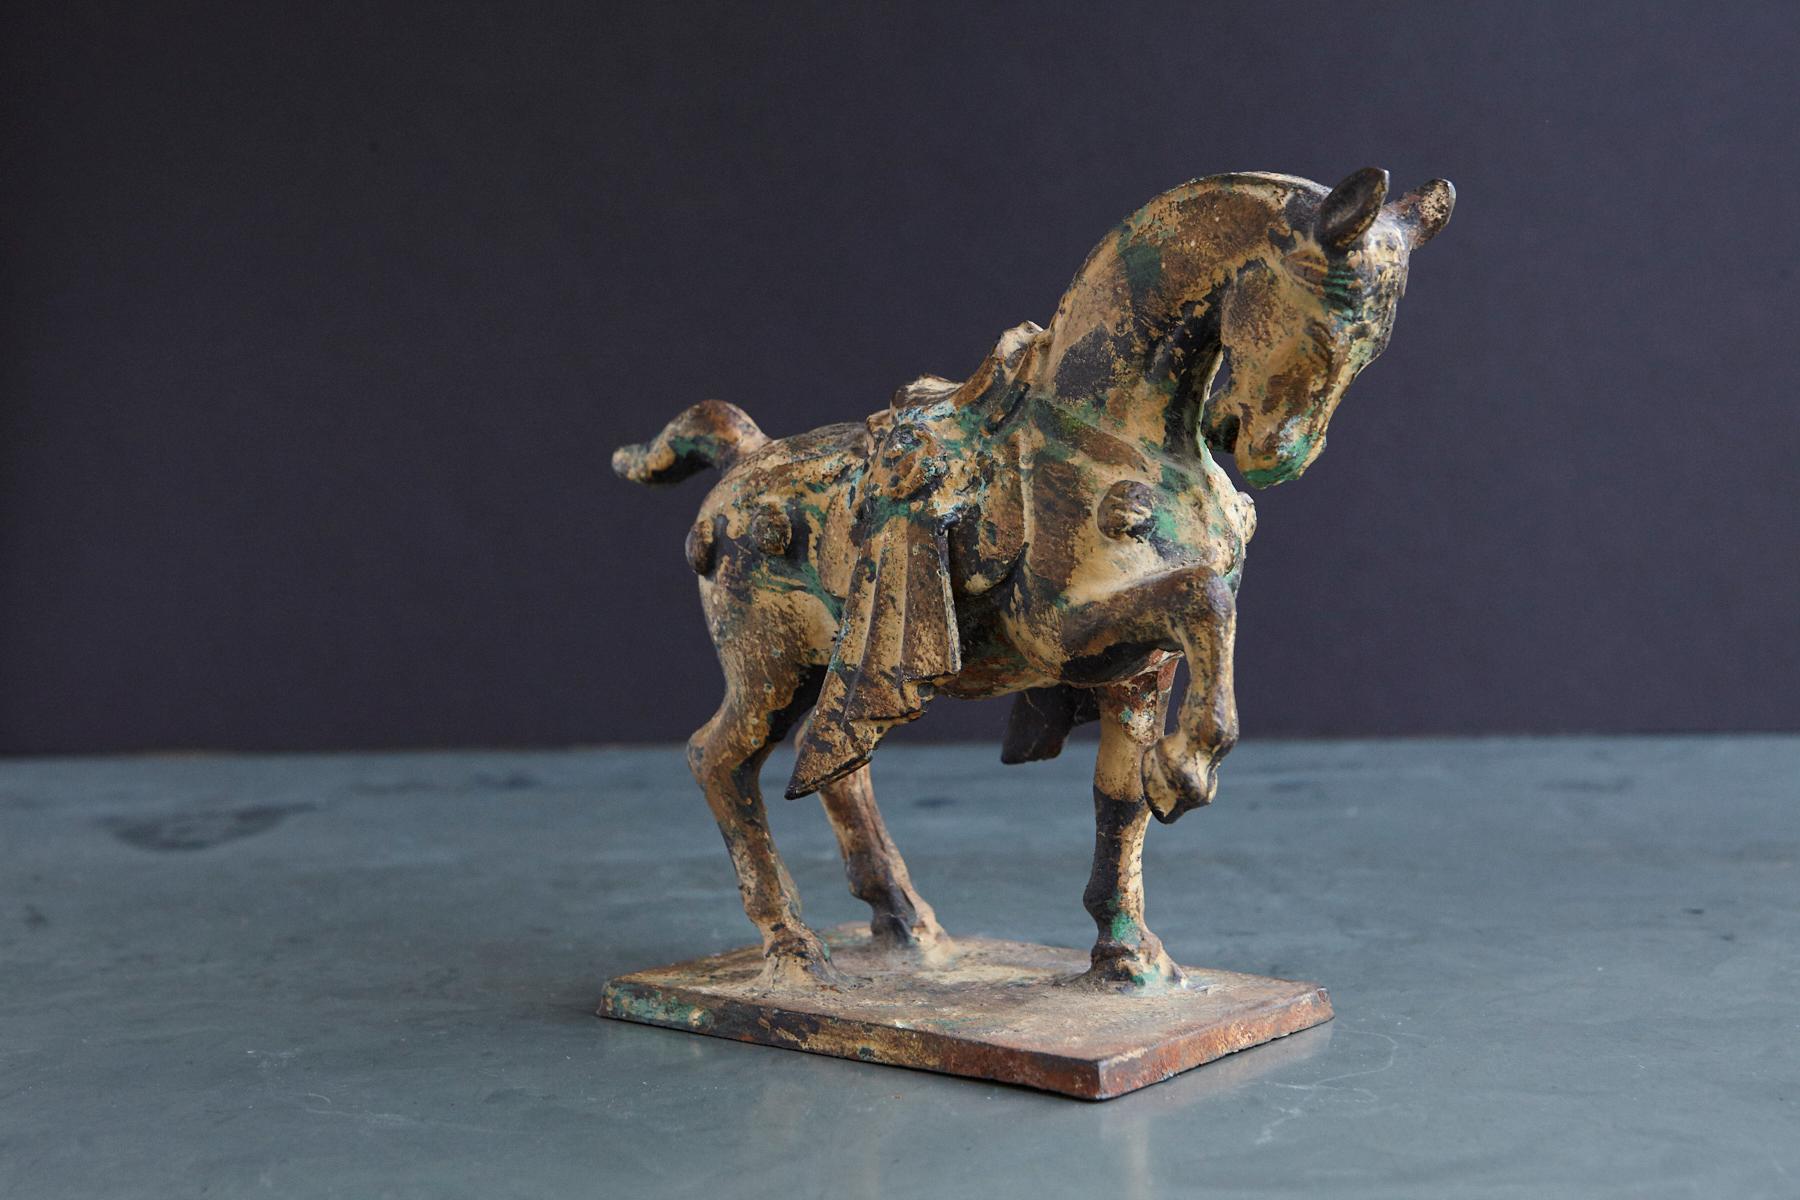 Lovely and very decorative 20th century cast iron circus or parade toy horse with fantastic oxidation colors and patina.